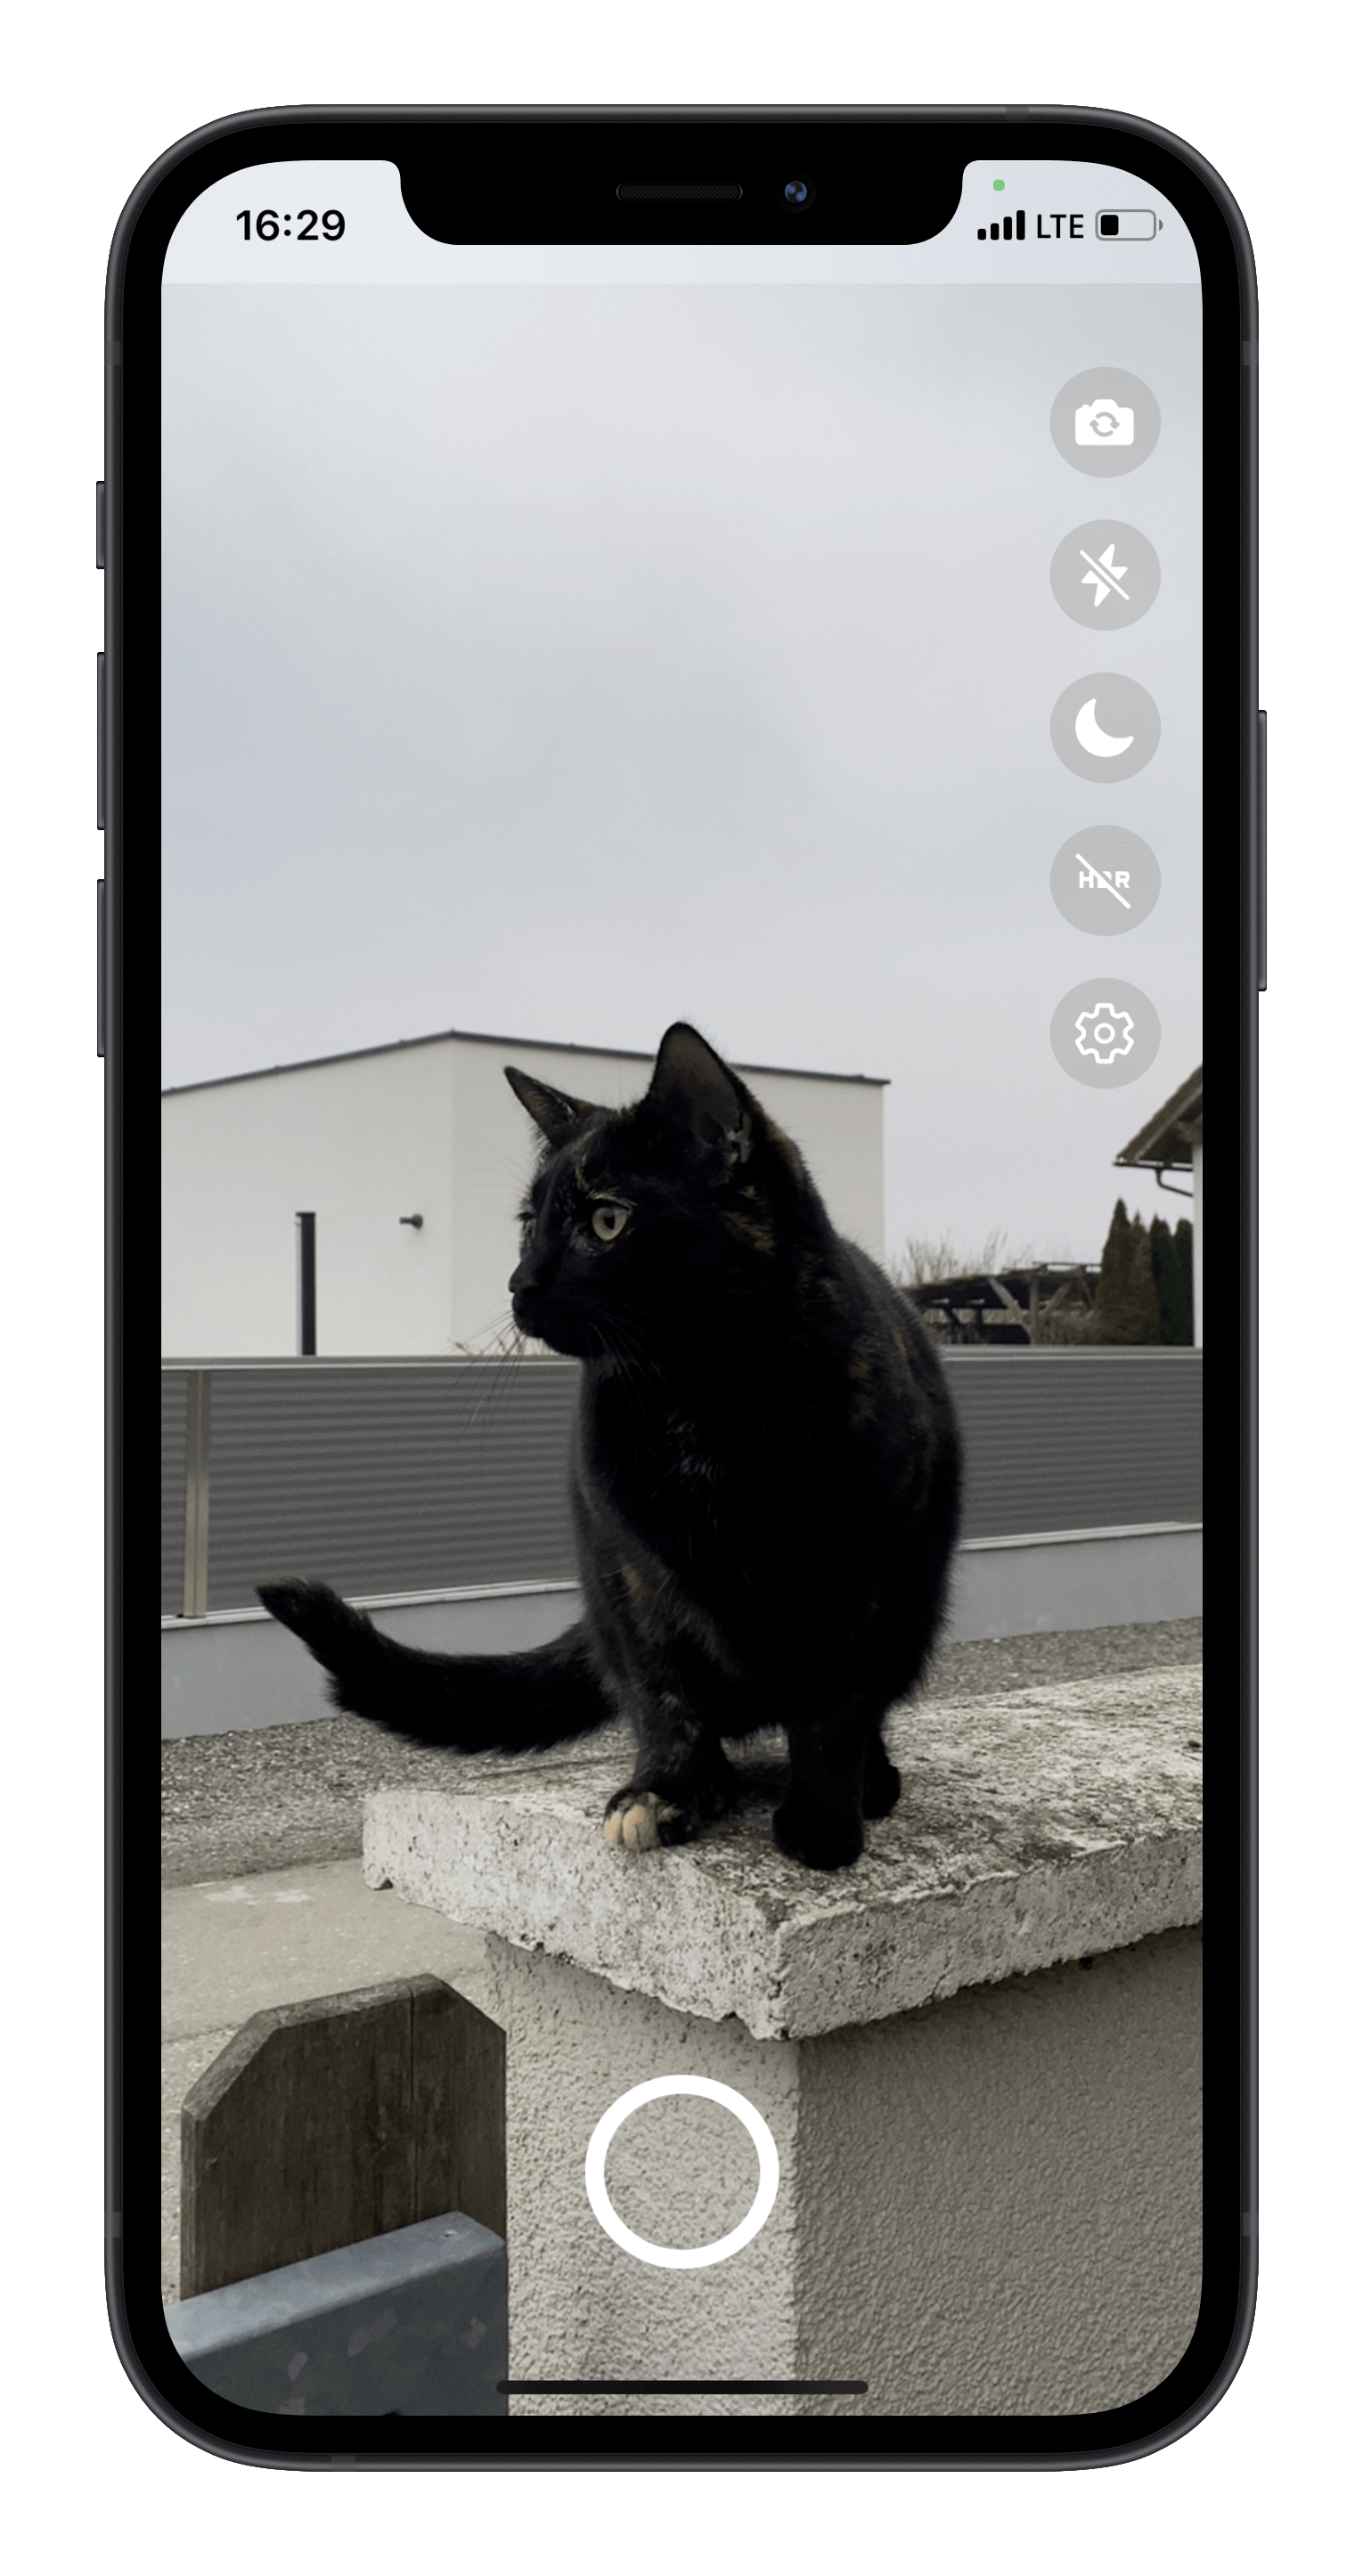 demo-picture-of-react-native-vision-camera